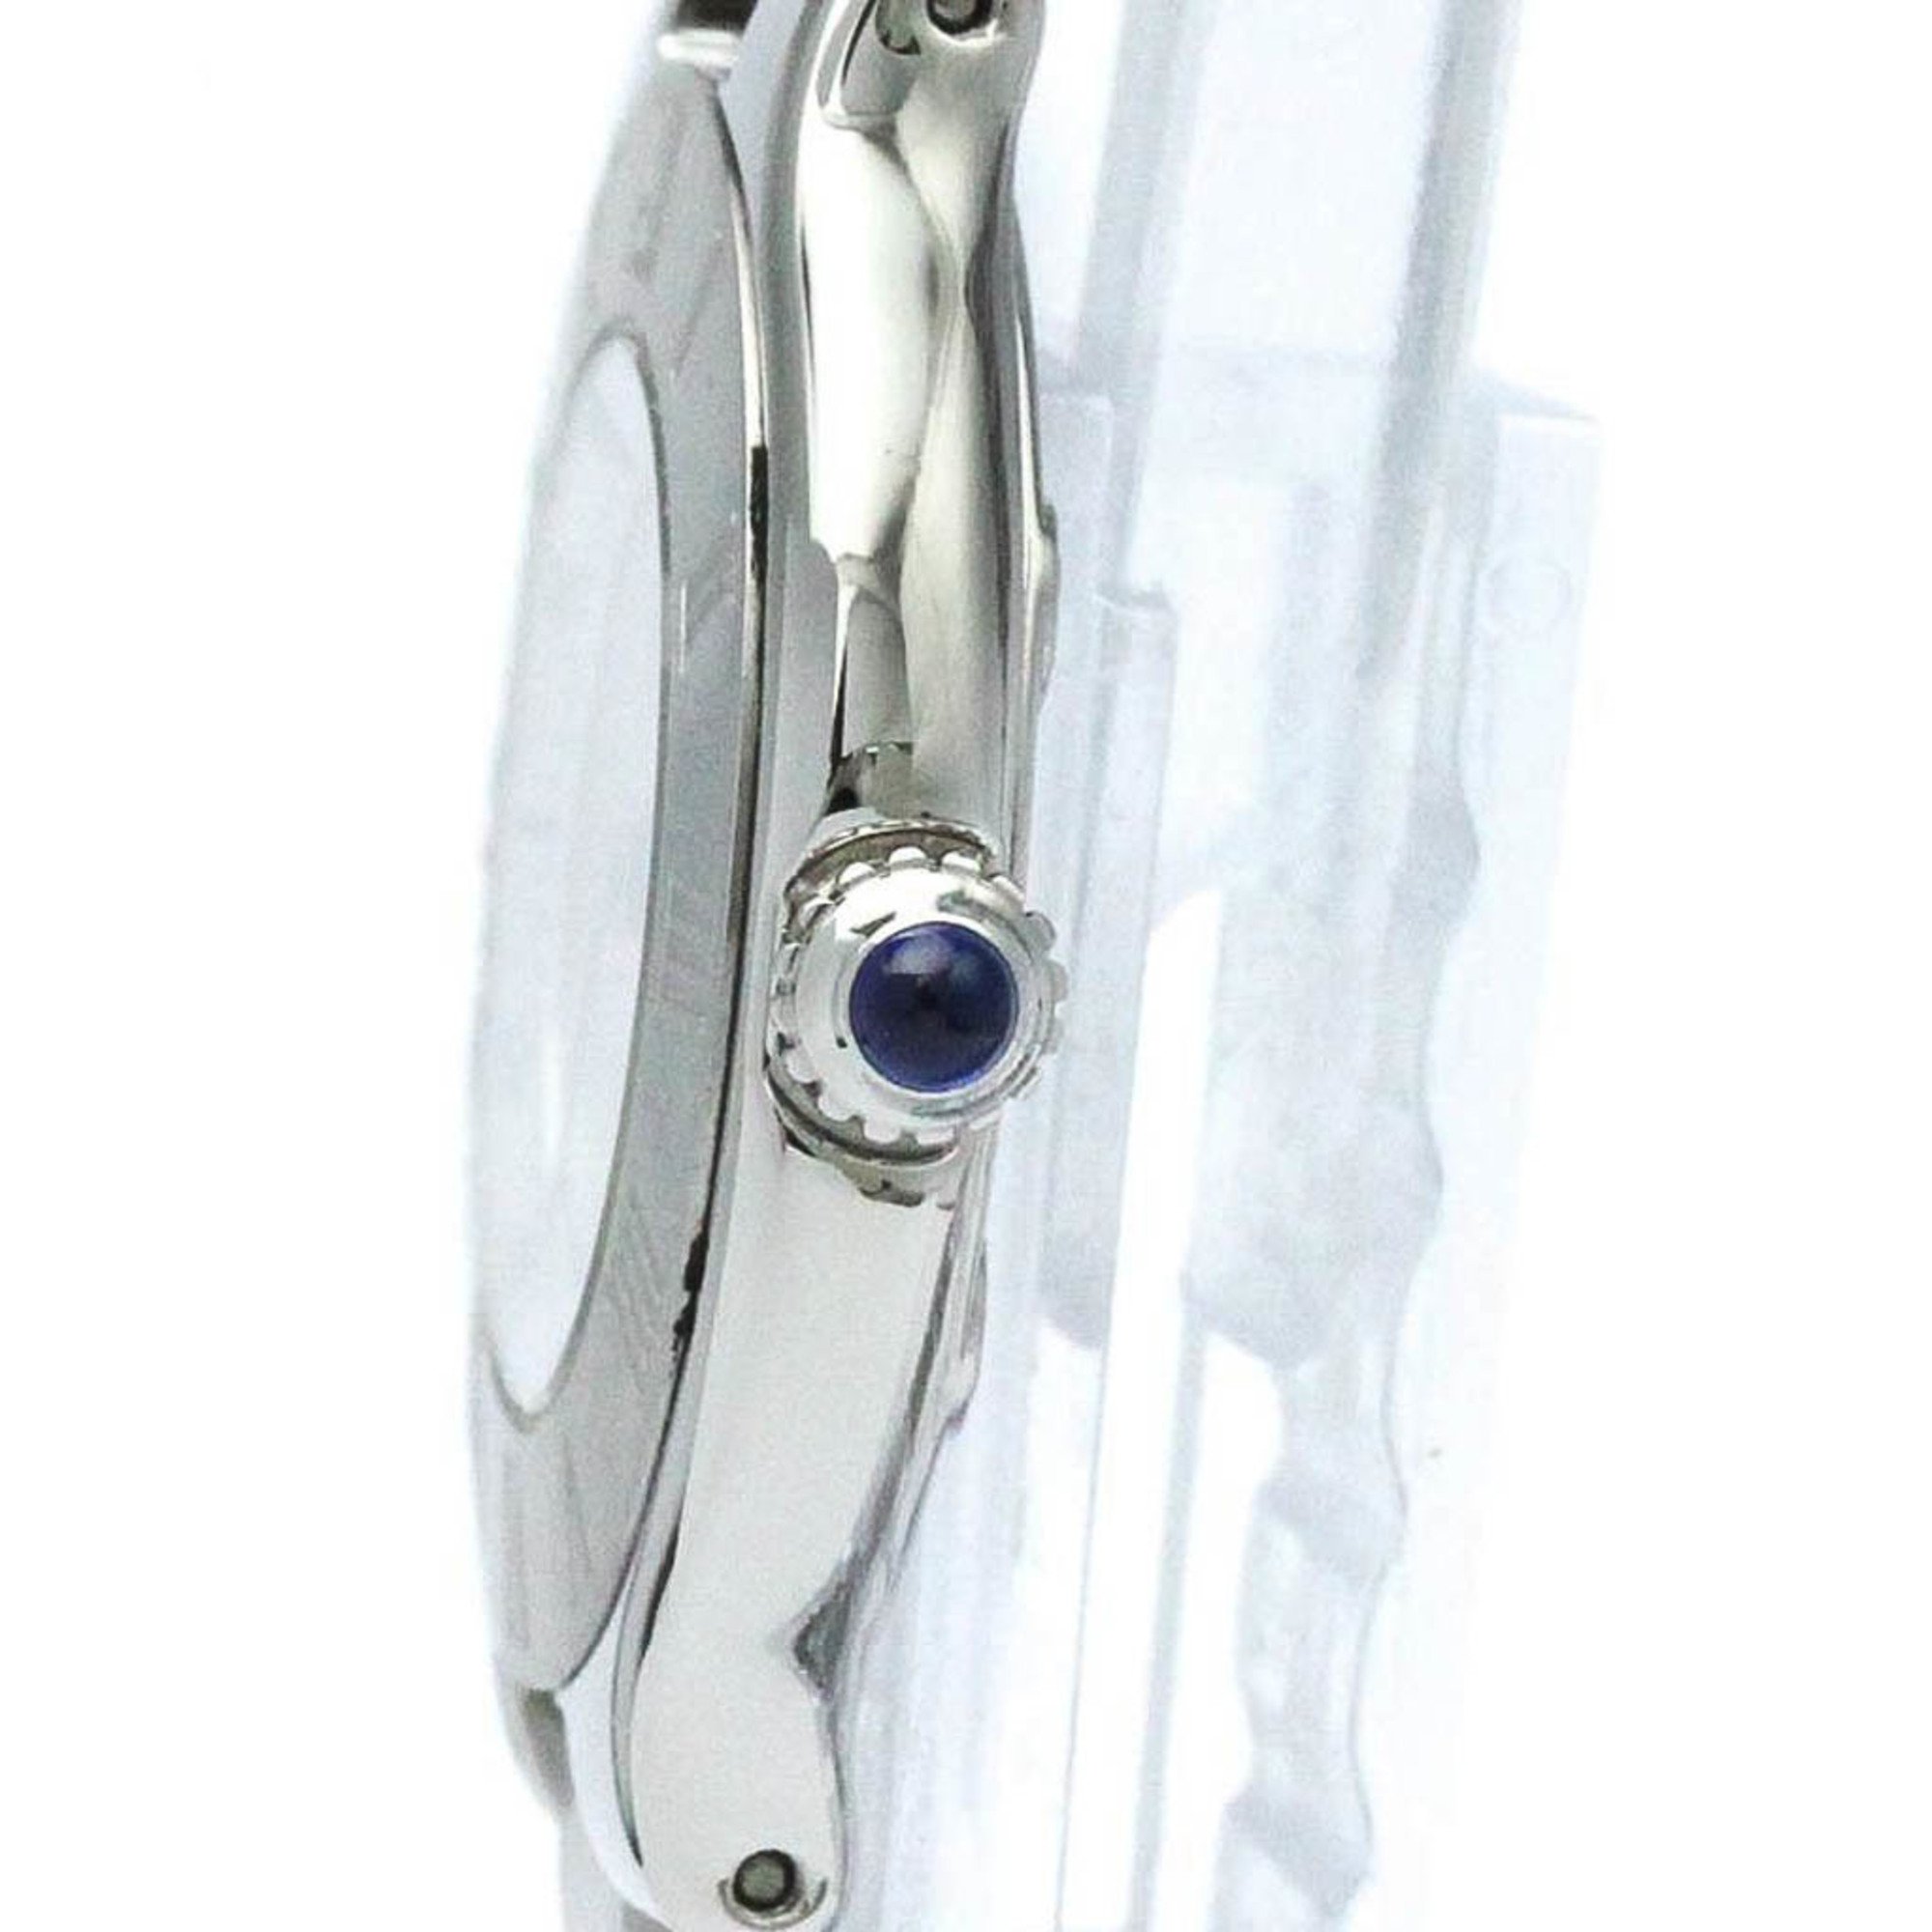 Polished CARTIER Must 21 Stainless Steel Quartz Ladies Watch W10109T2 BF571206